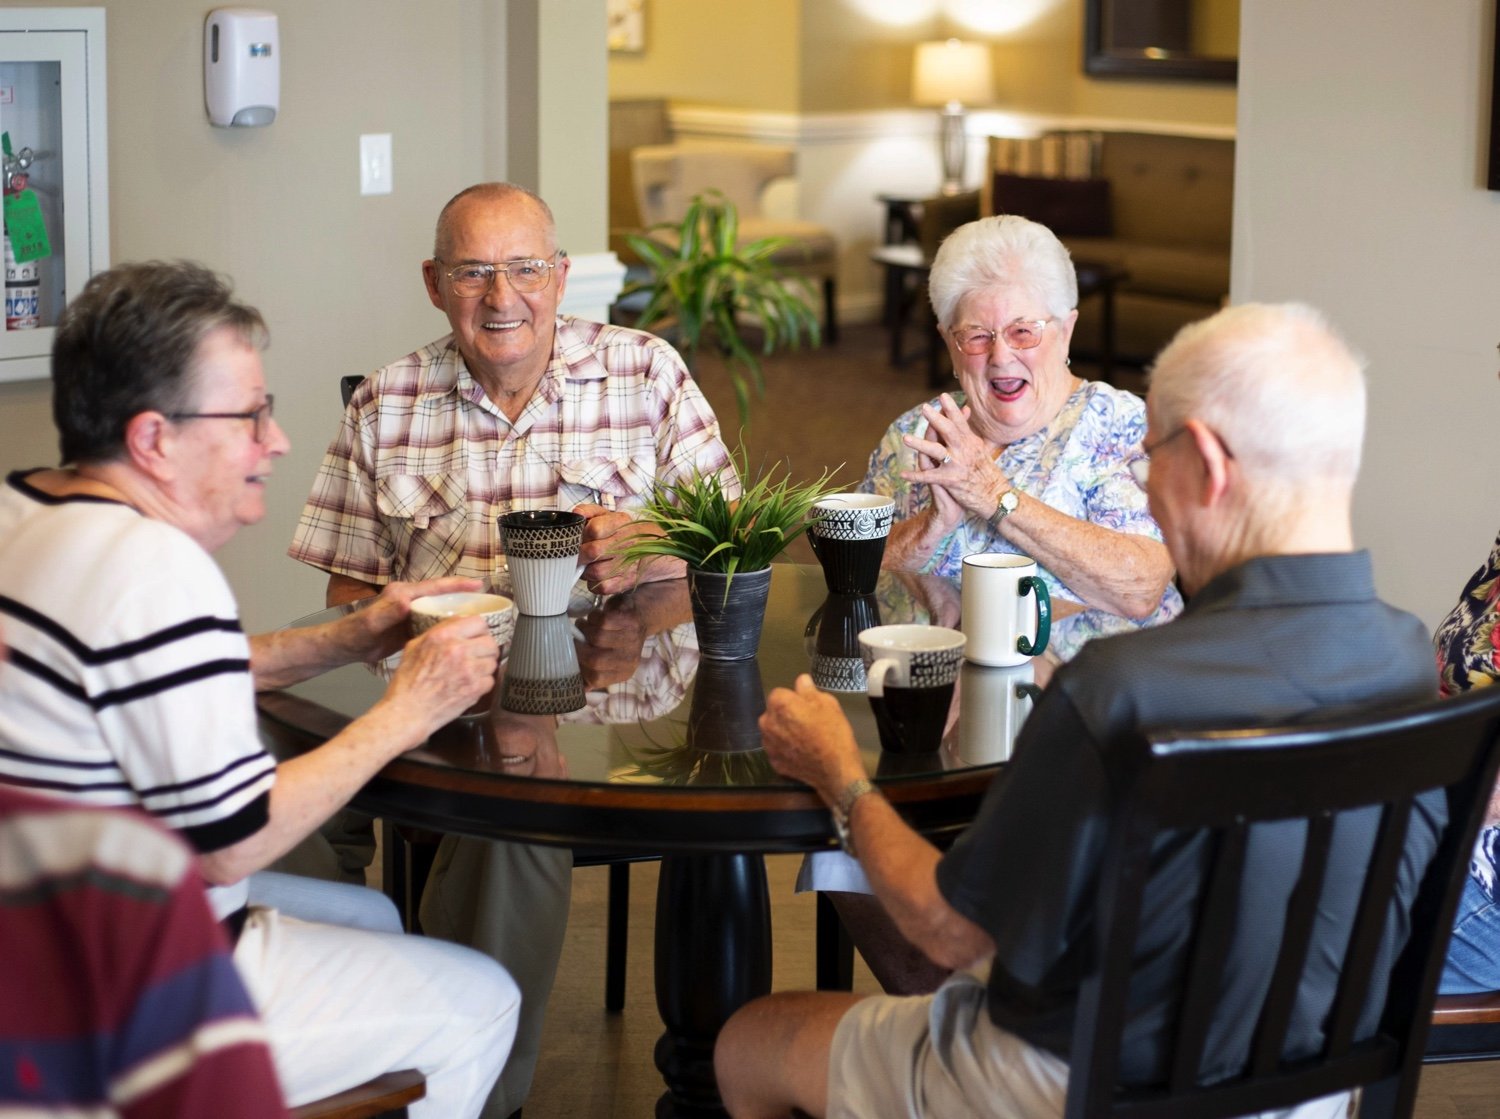 Group_of_Residents_Smiling_Laughing_at_a_dining_room_table_together